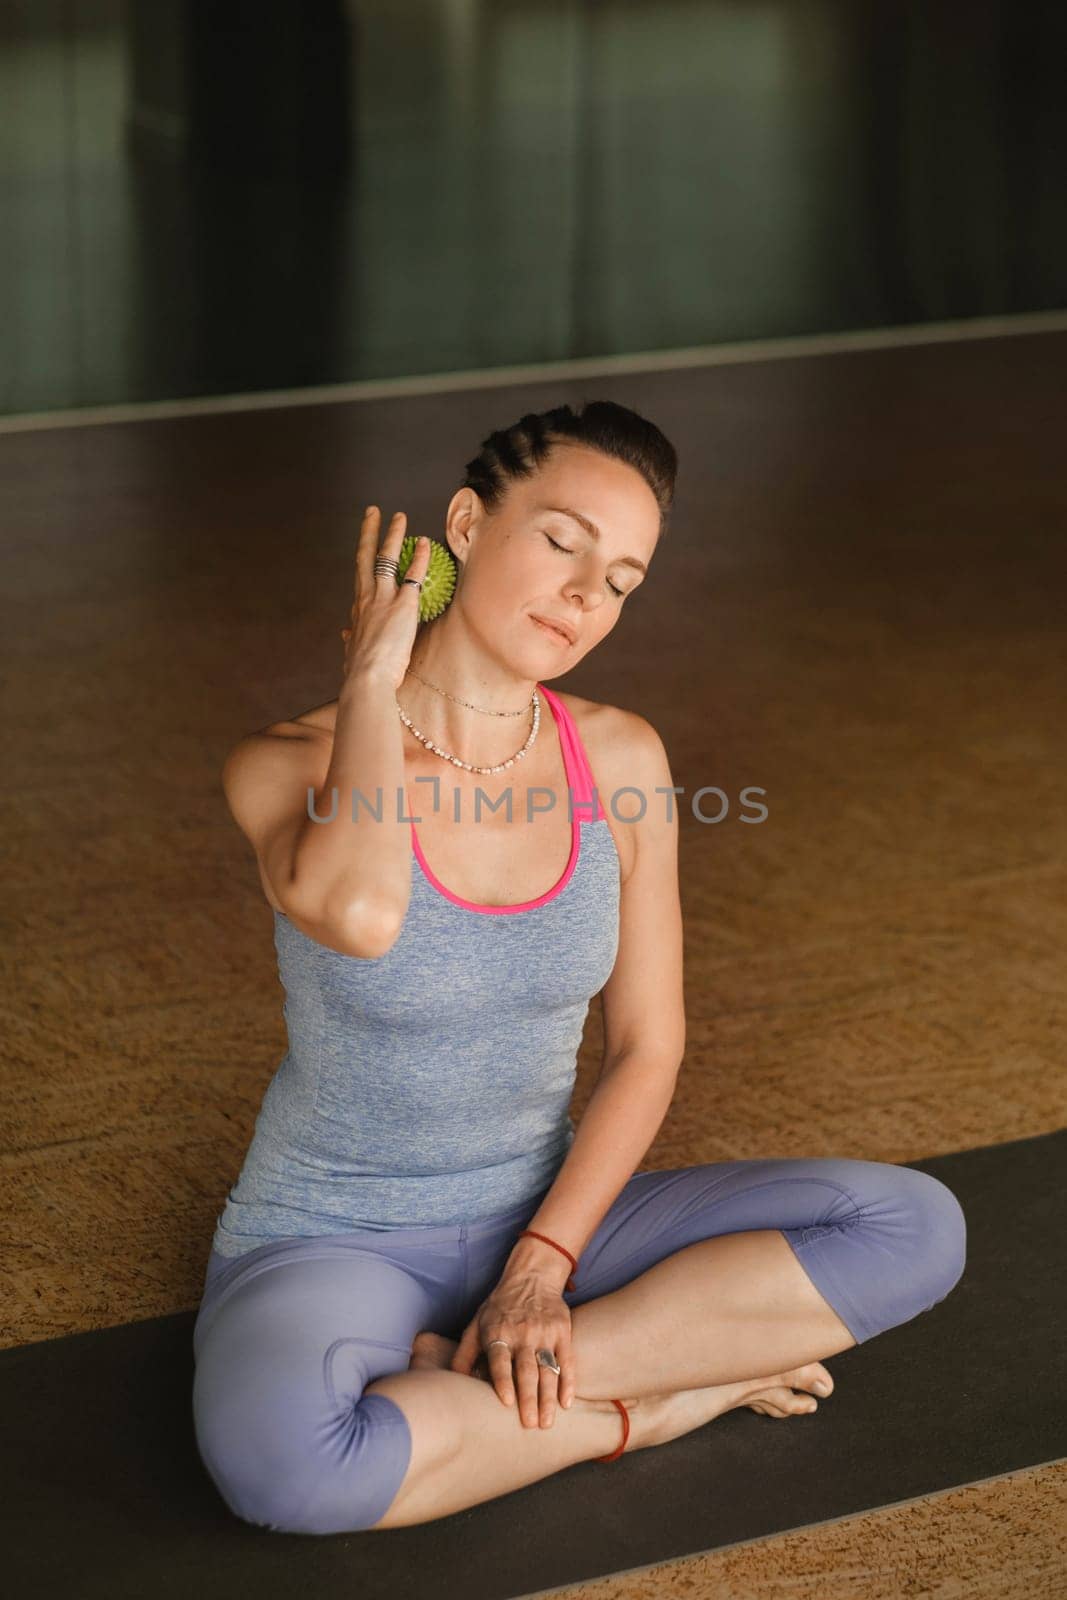 A woman does self - massage with a small ball while sitting in a fitness room . Myofascial relaxation.